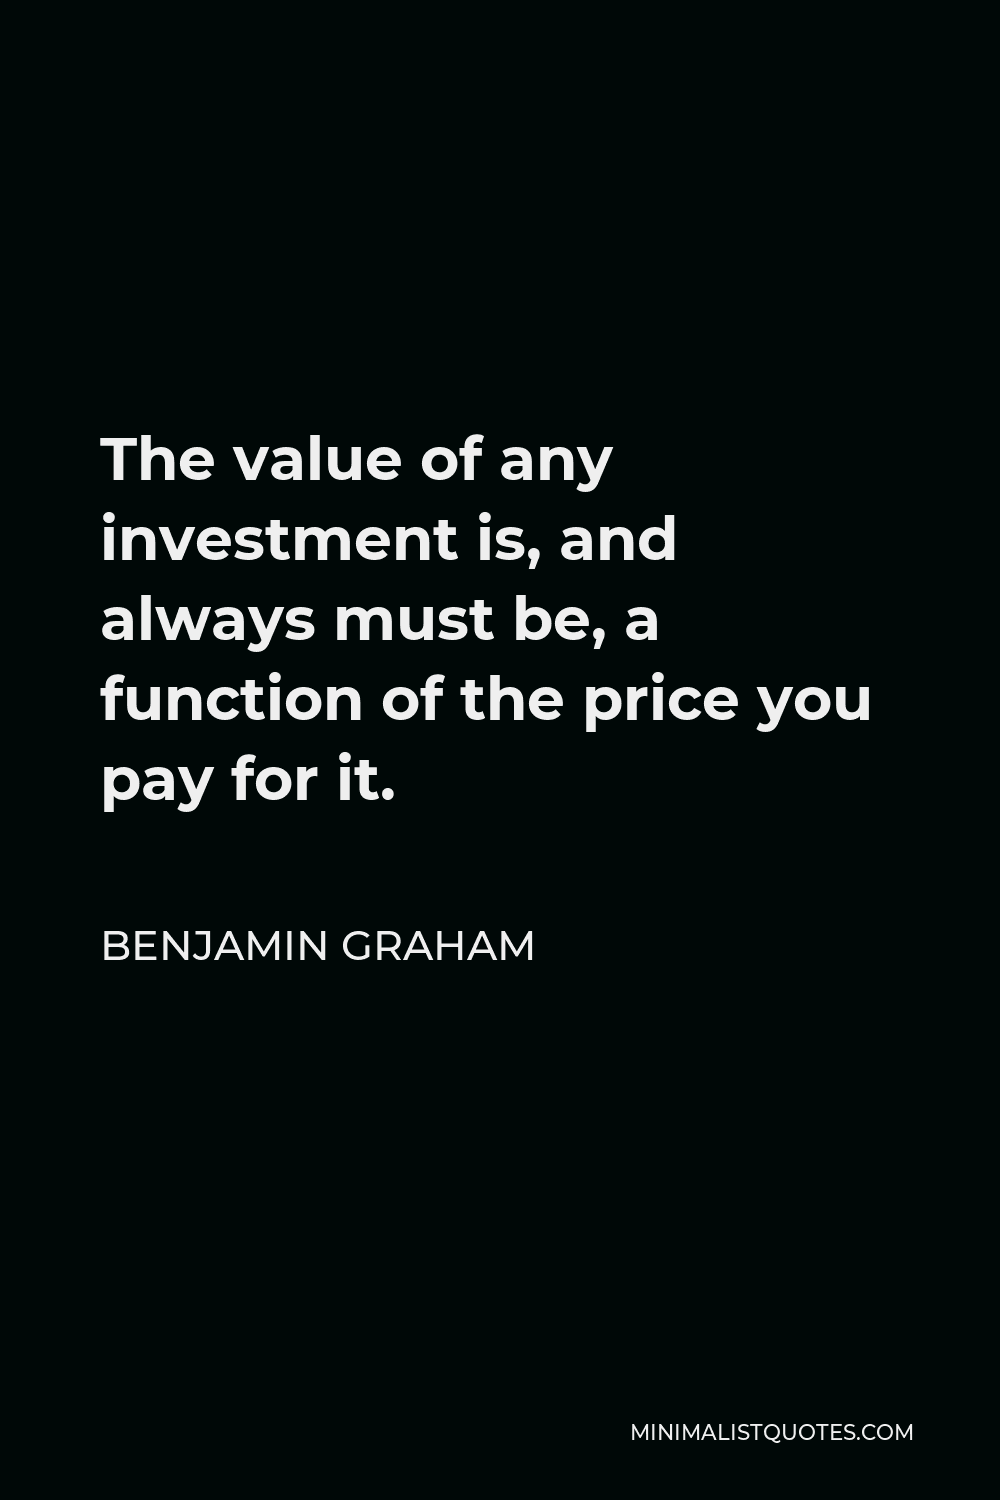 Benjamin Graham Quote - The value of any investment is, and always must be, a function of the price you pay for it.